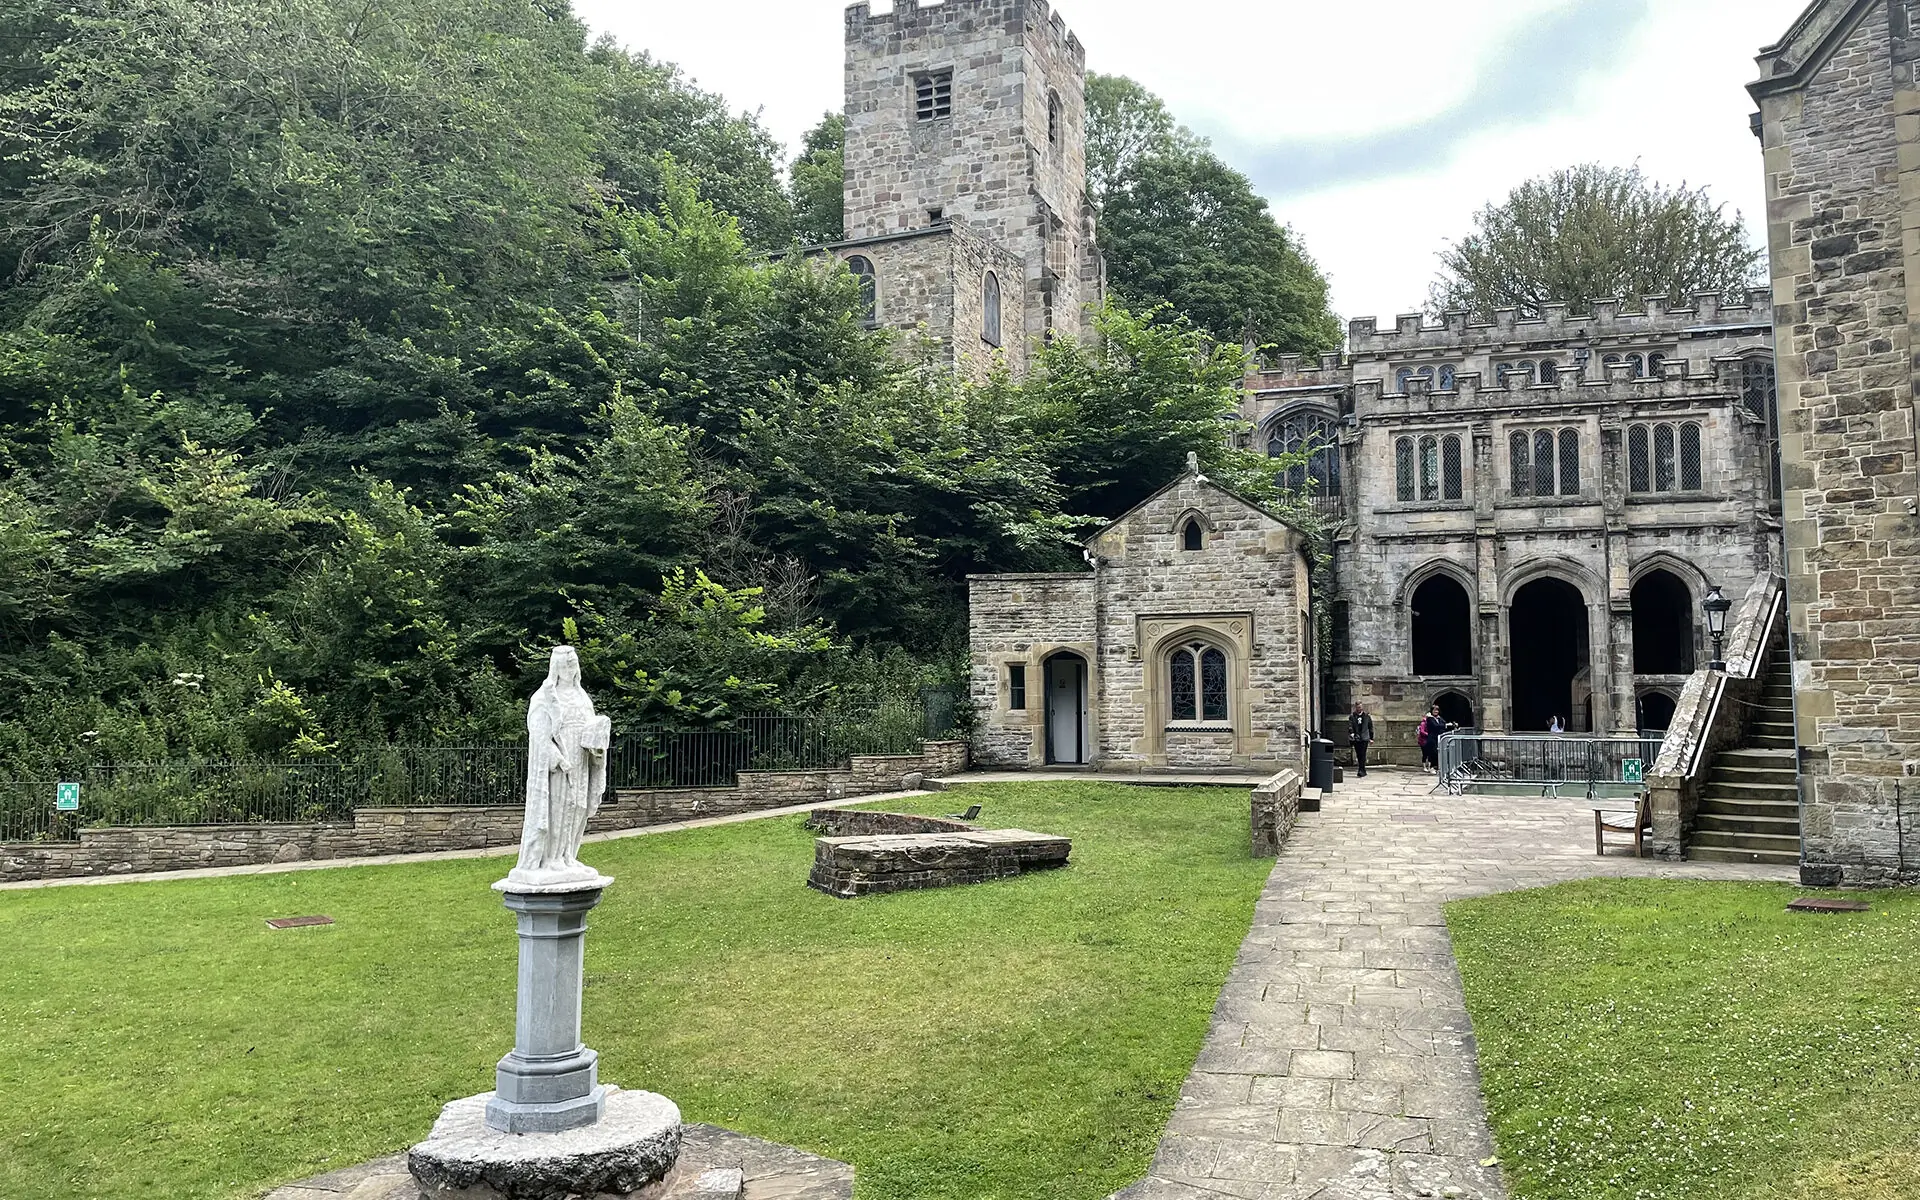 An historic agreement to recognise and celebrate the significance of the holy well and shrine to Saint Winefride in Holywell, Wales has been signed by the local Roman Catholic and Anglican bishops